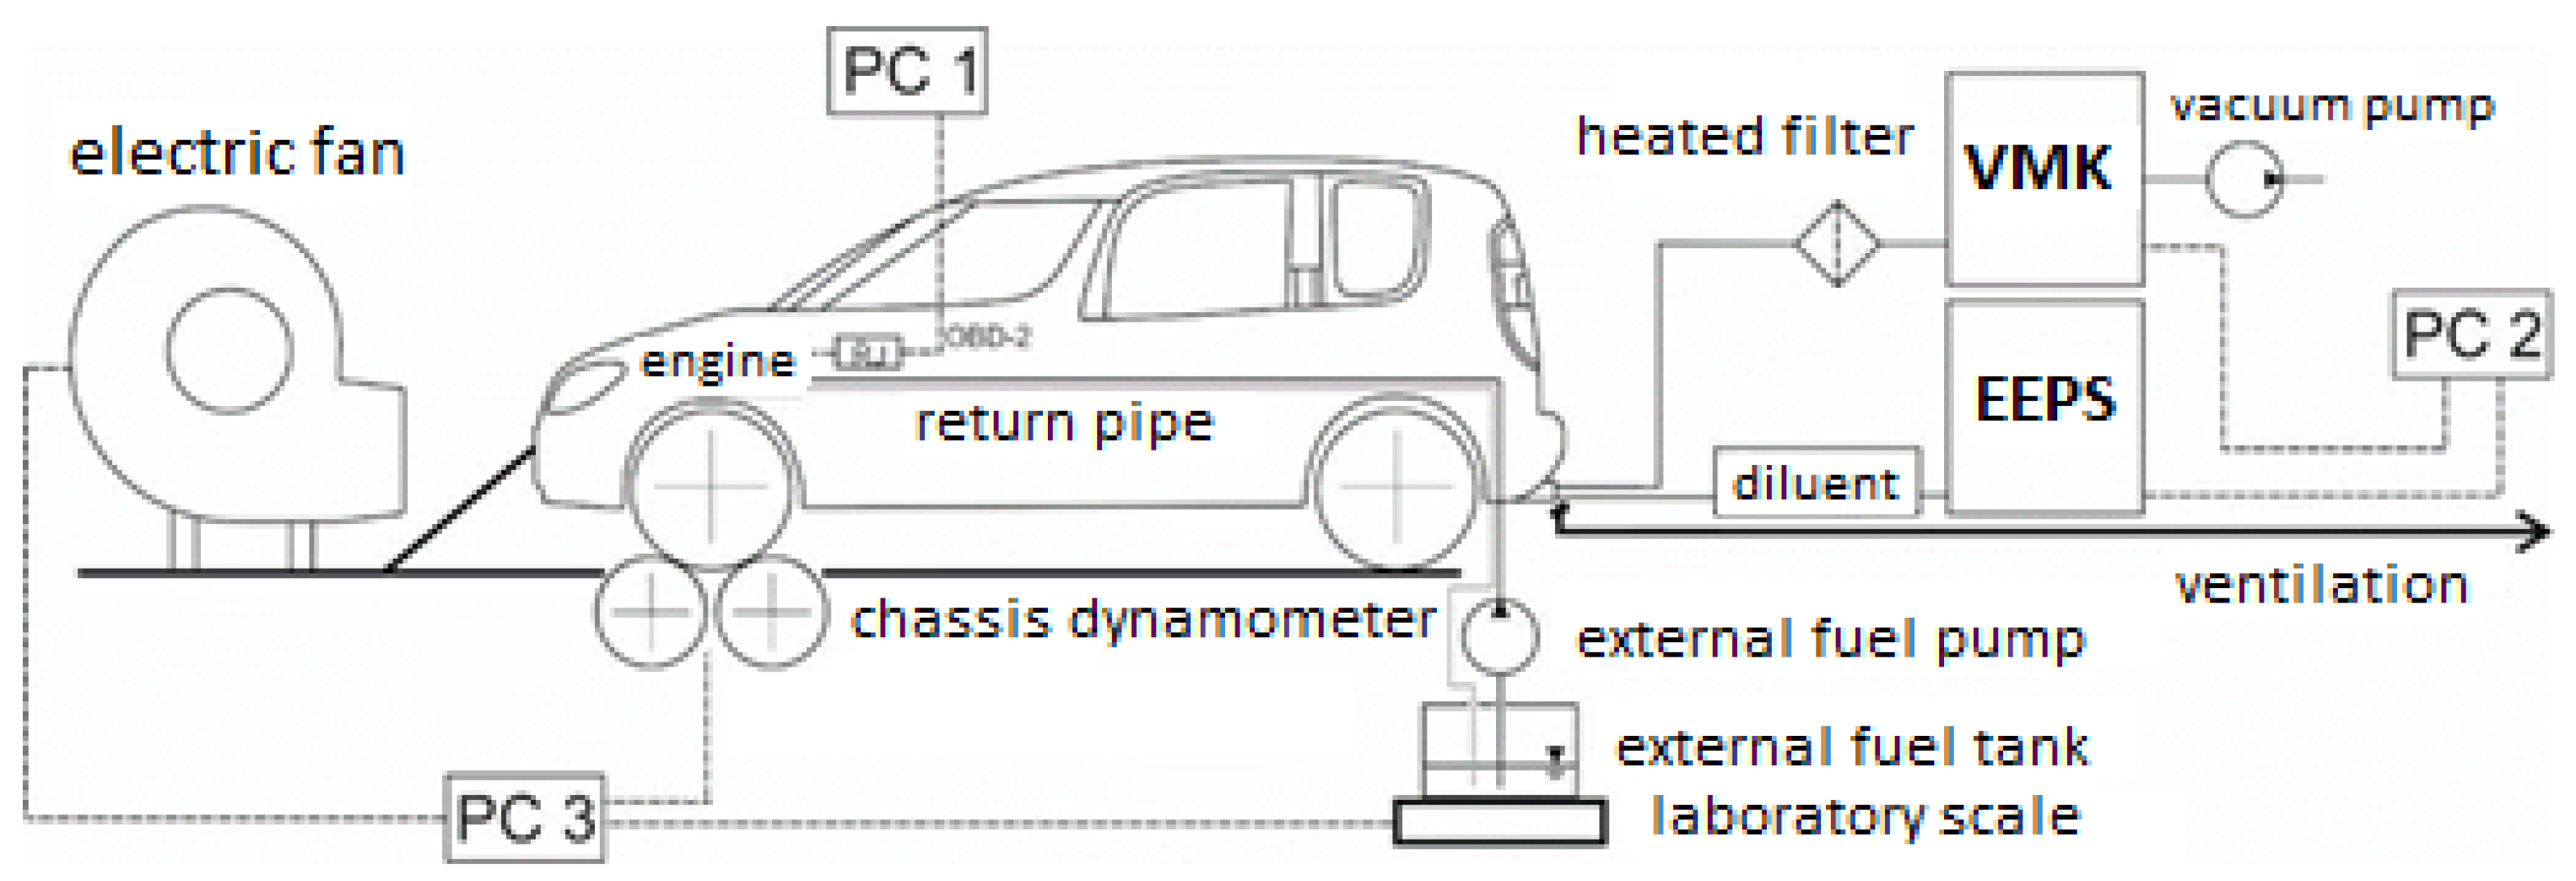 Energies | Free Full-Text | The Impact of Selected Biofuels on the Skoda  Roomster 1.4TDI Engine's Operational Parameters